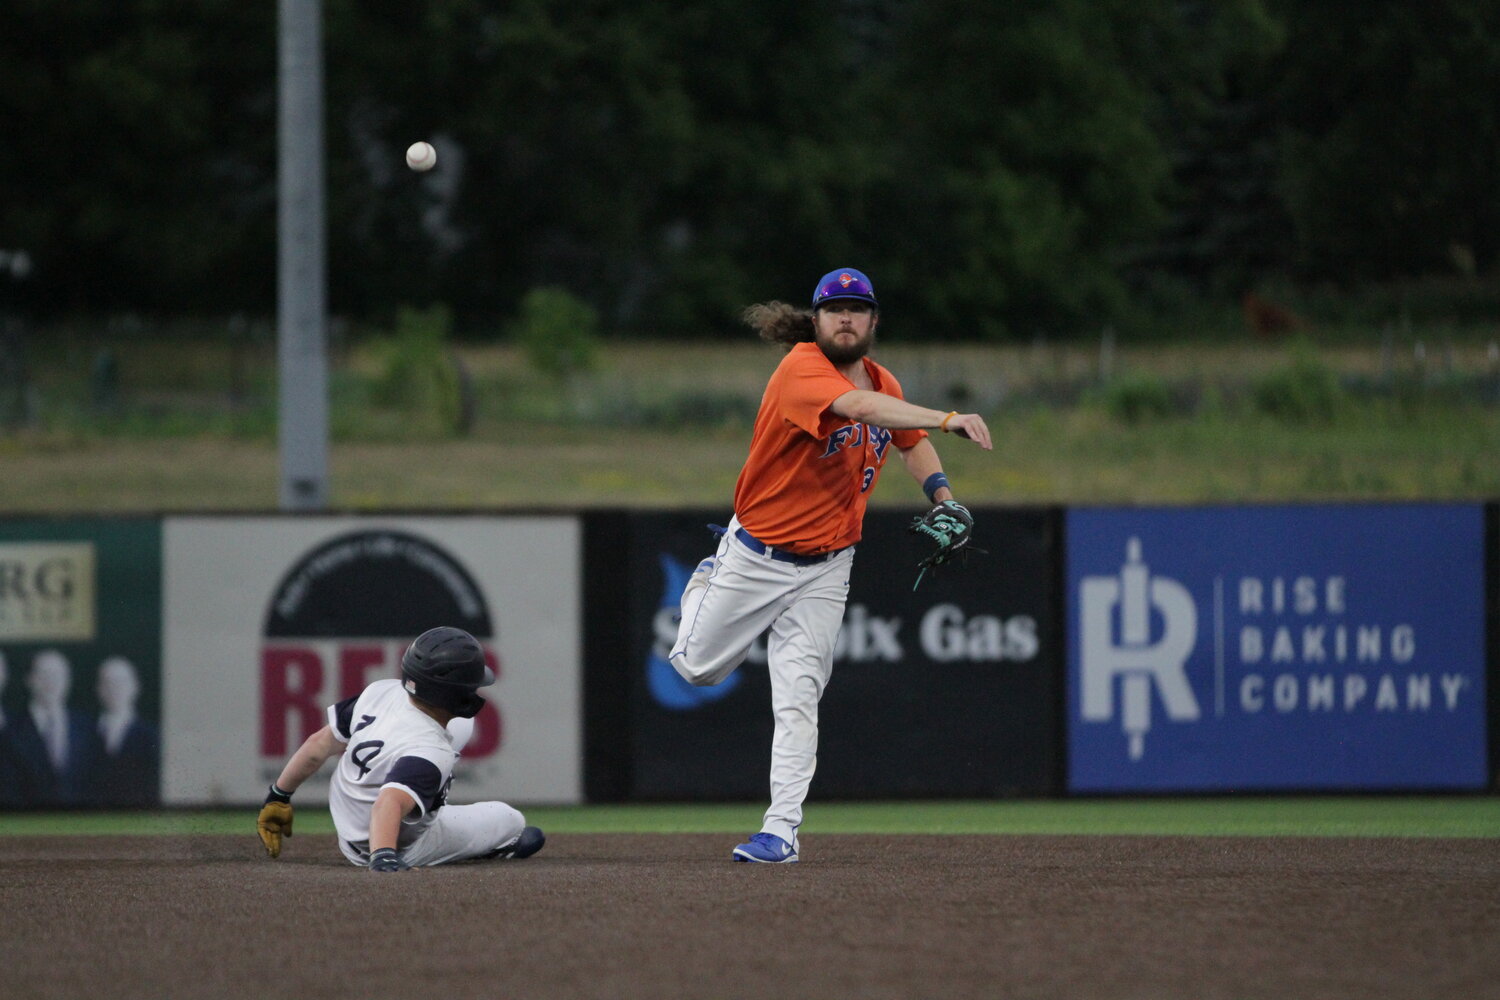 River Falls Fighting Fish utility player Matt Bacon rifles a ball to first base moments after stepping on second to successfully turn a double play against the Elmwood Expos on Saturday, June 24.